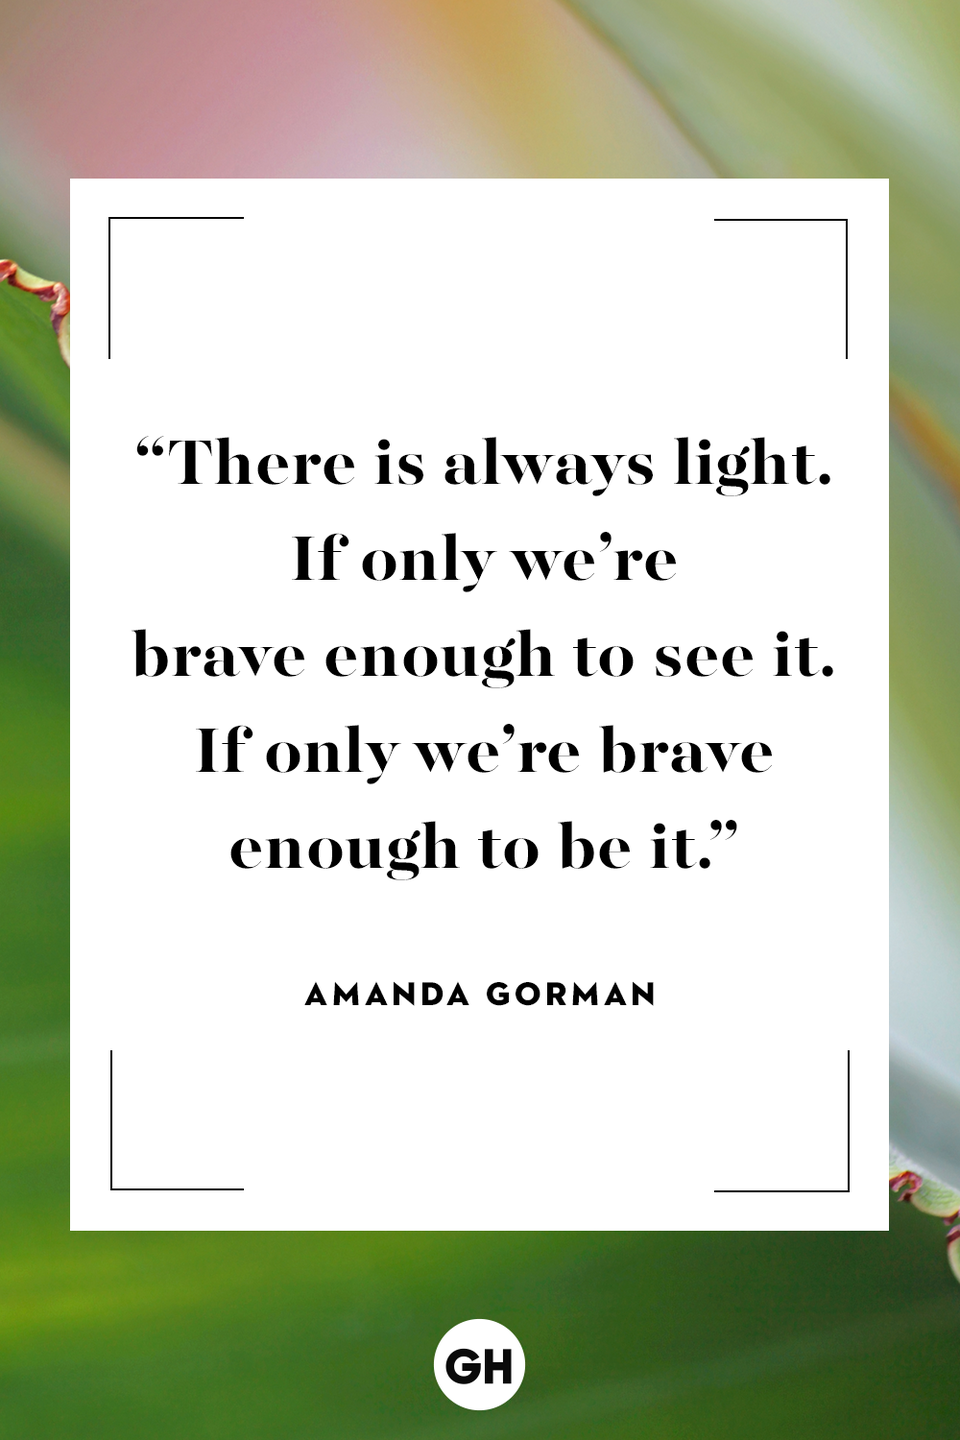 <p>There is always light. If only we're brave enough to see it. If only we're brave enough to be it.</p>